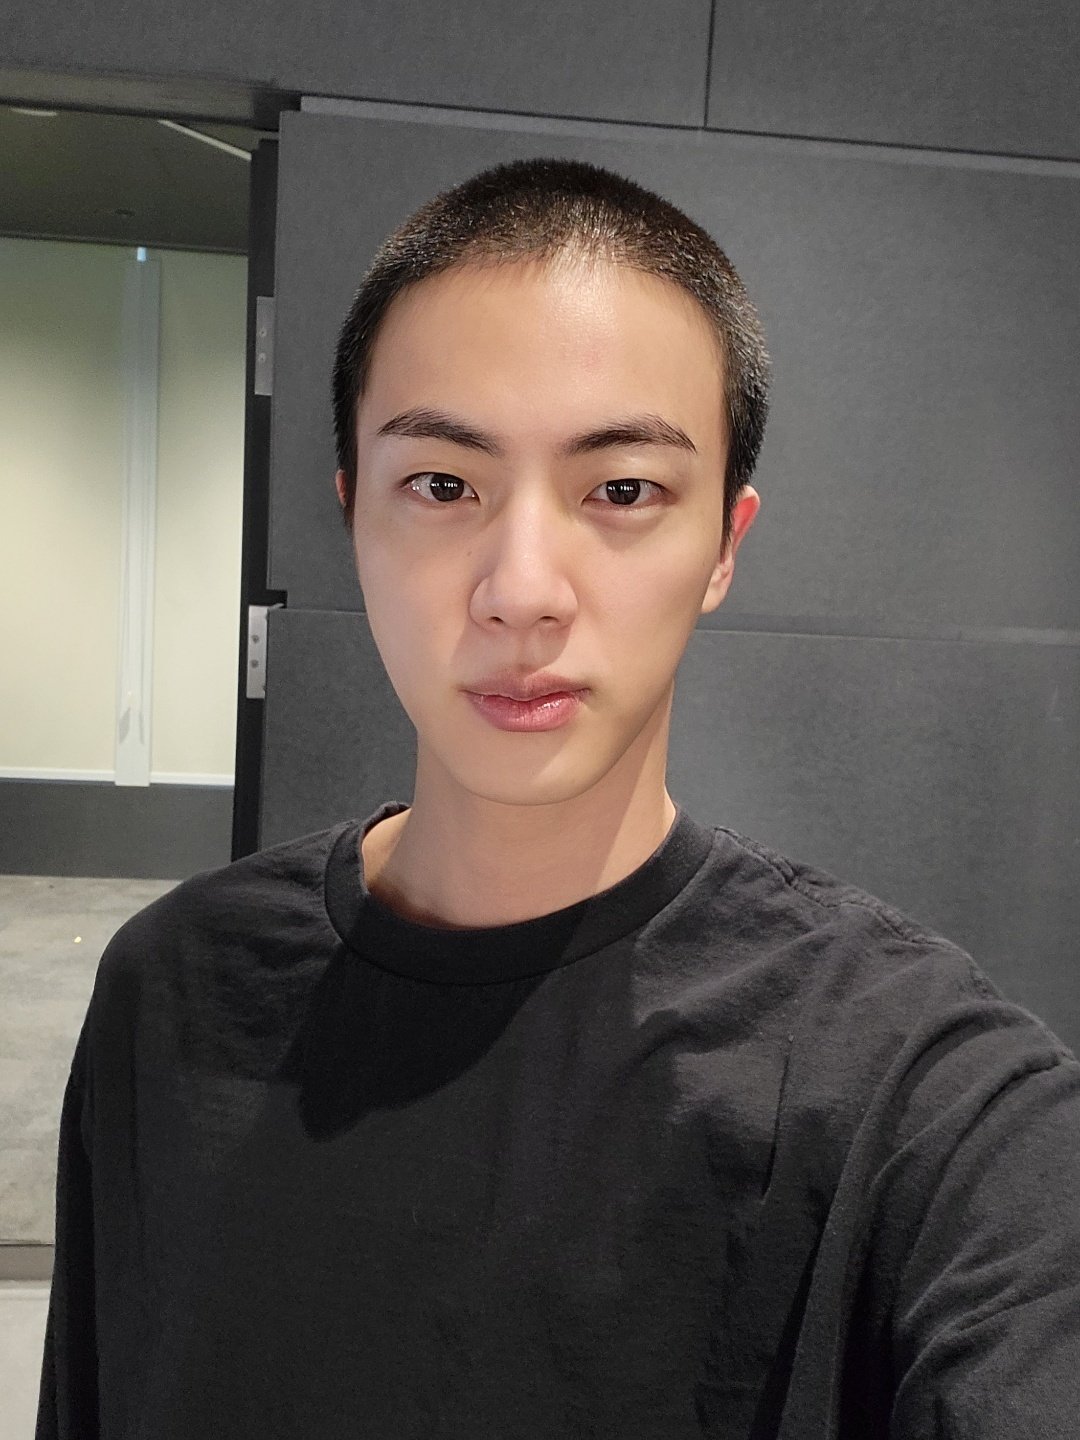 Jin of BTS snows off a new army style haircut, as he is being conscripted in the the South Korean Armed Forces. Photo: Weverse / @Jin